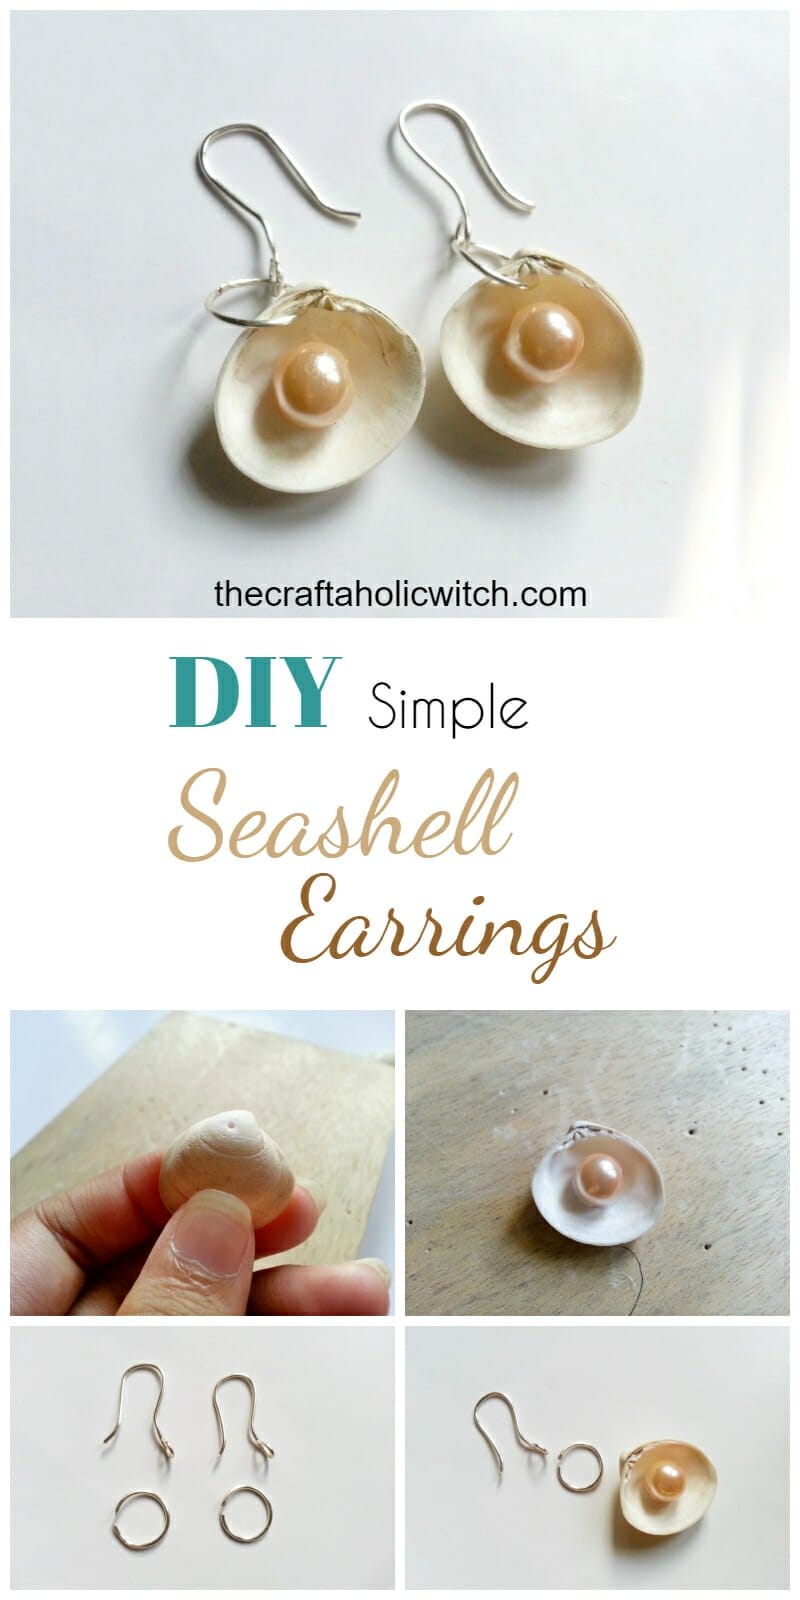 DIY Rose Earrings With Polymer Clay : 14 Steps (with Pictures) -  Instructables